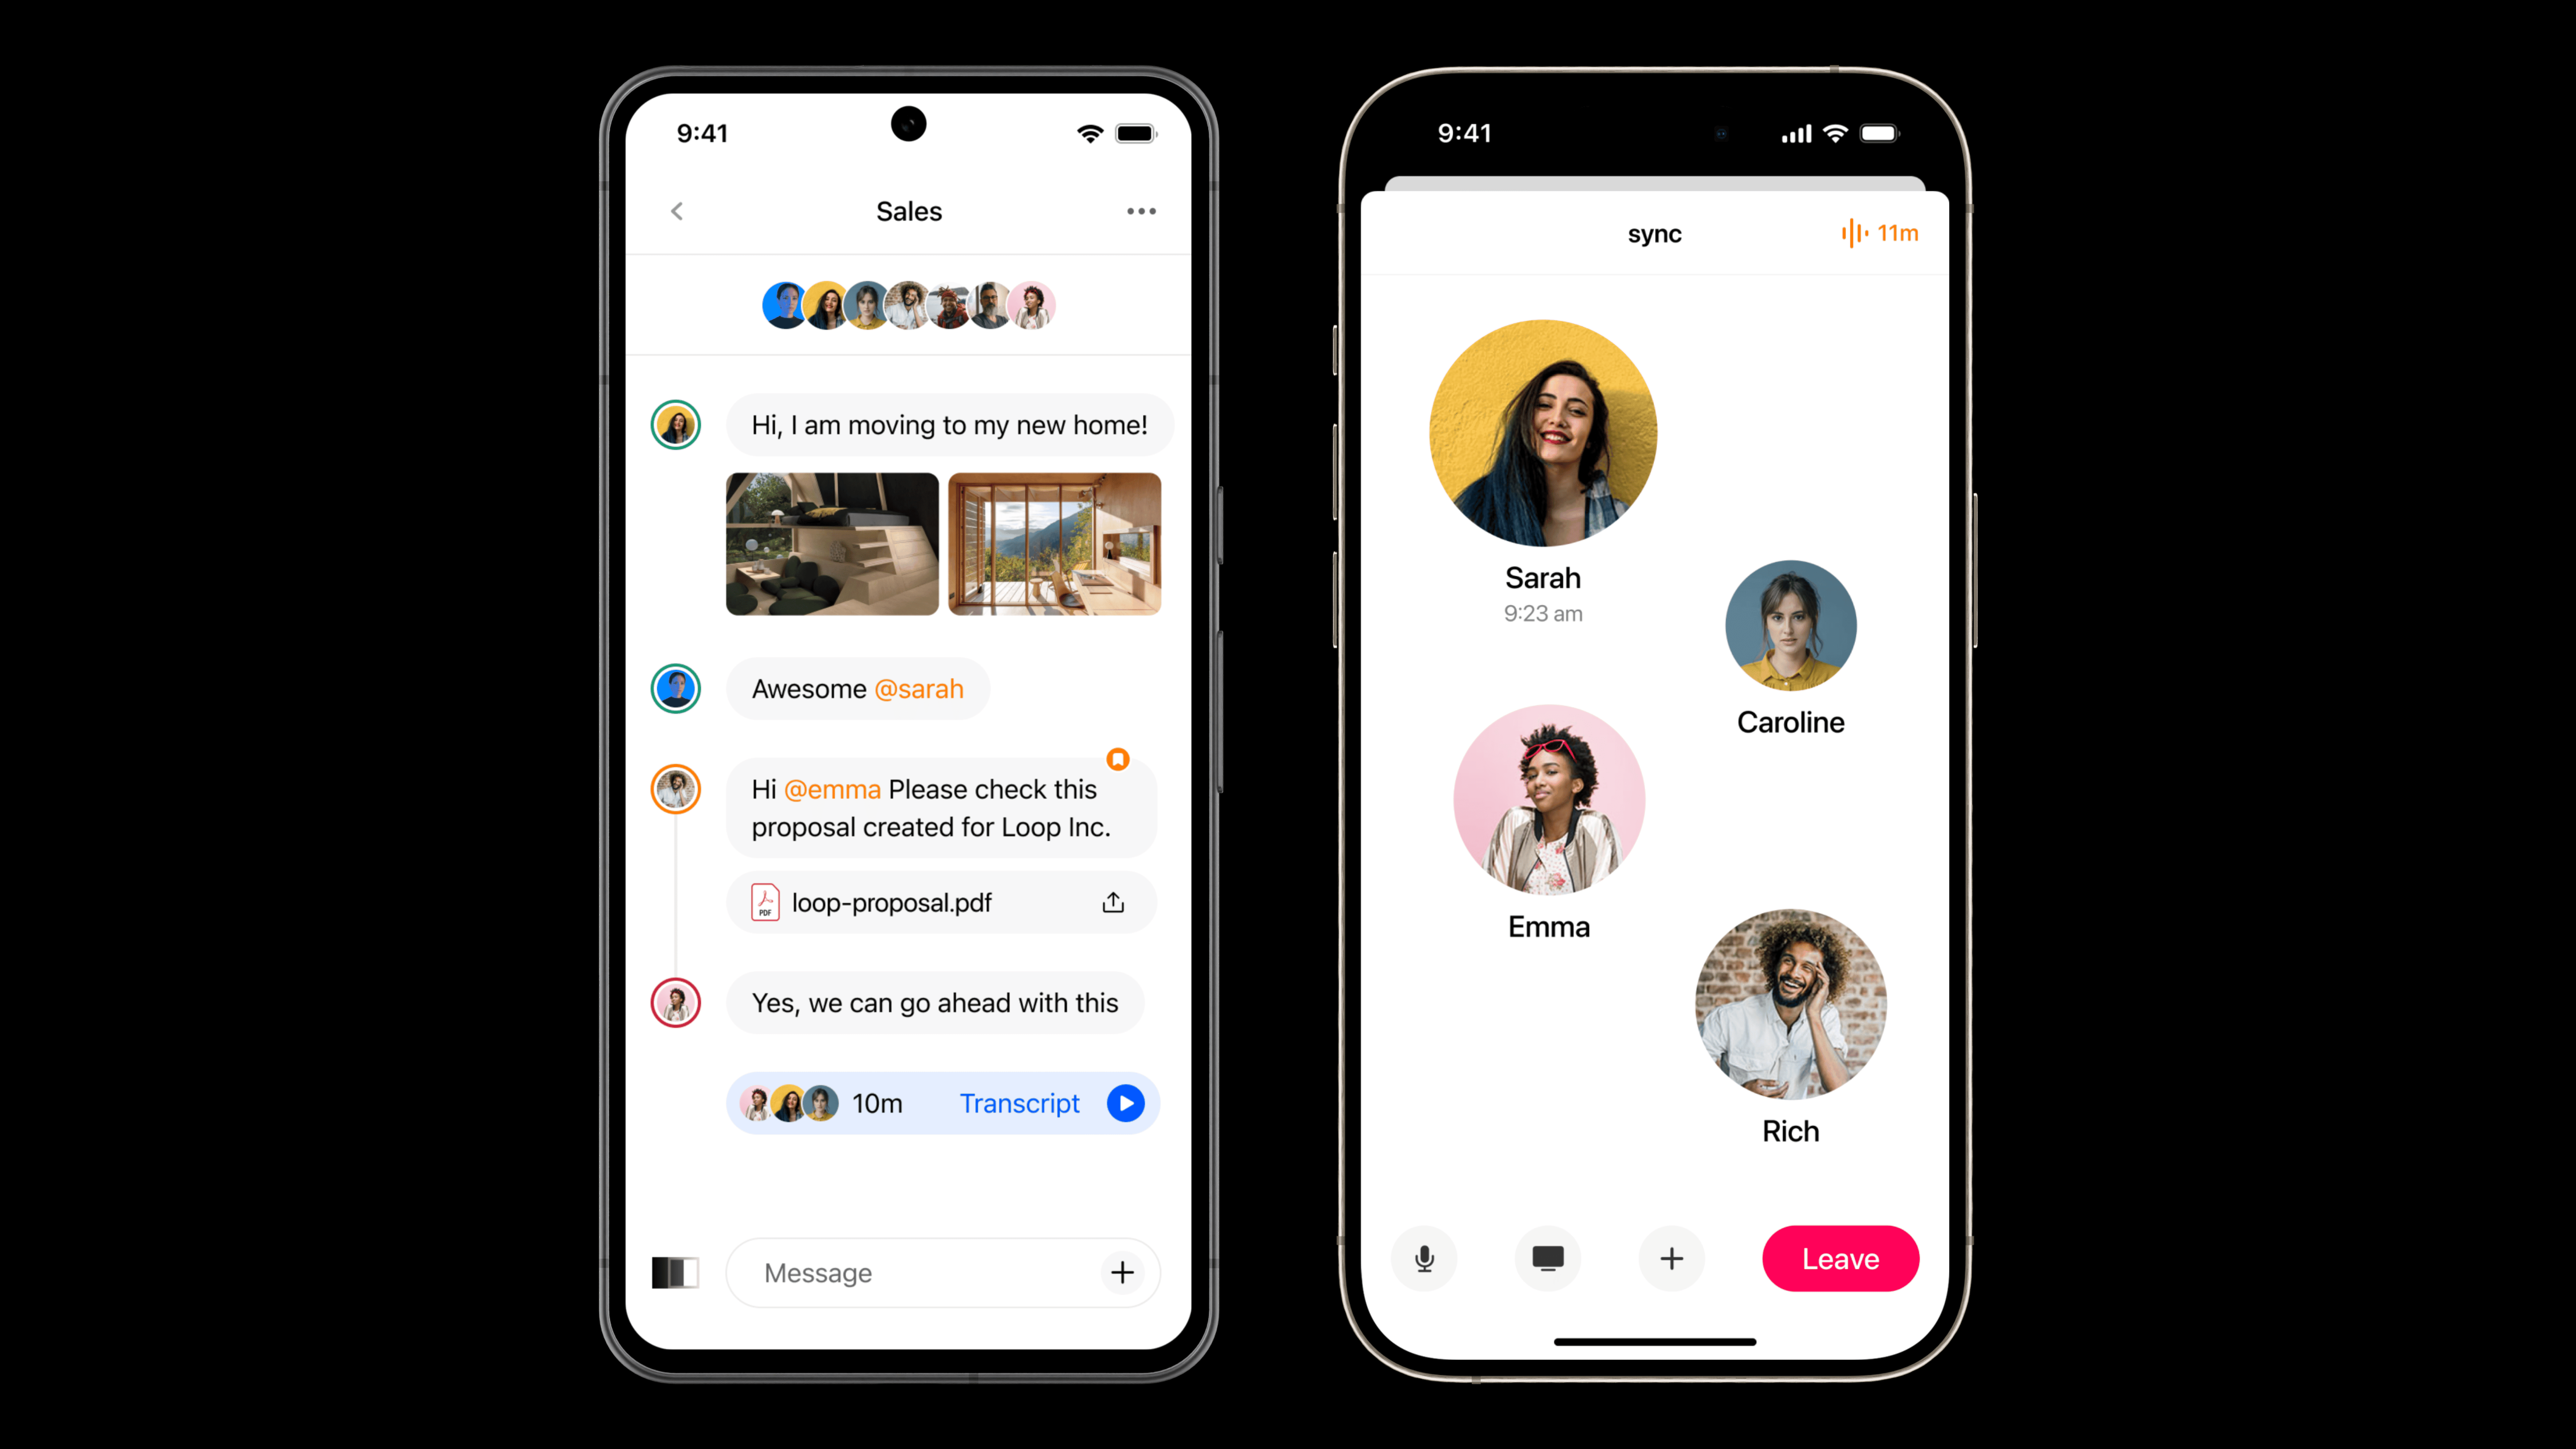 On the left, Tribe's Android app shows a sales chat thread with messages about moving to a new home, a proposal document, and team feedback. The right image shows Tribe's iOS app during a team call with Sarah, Caroline, Emma, and Rich.